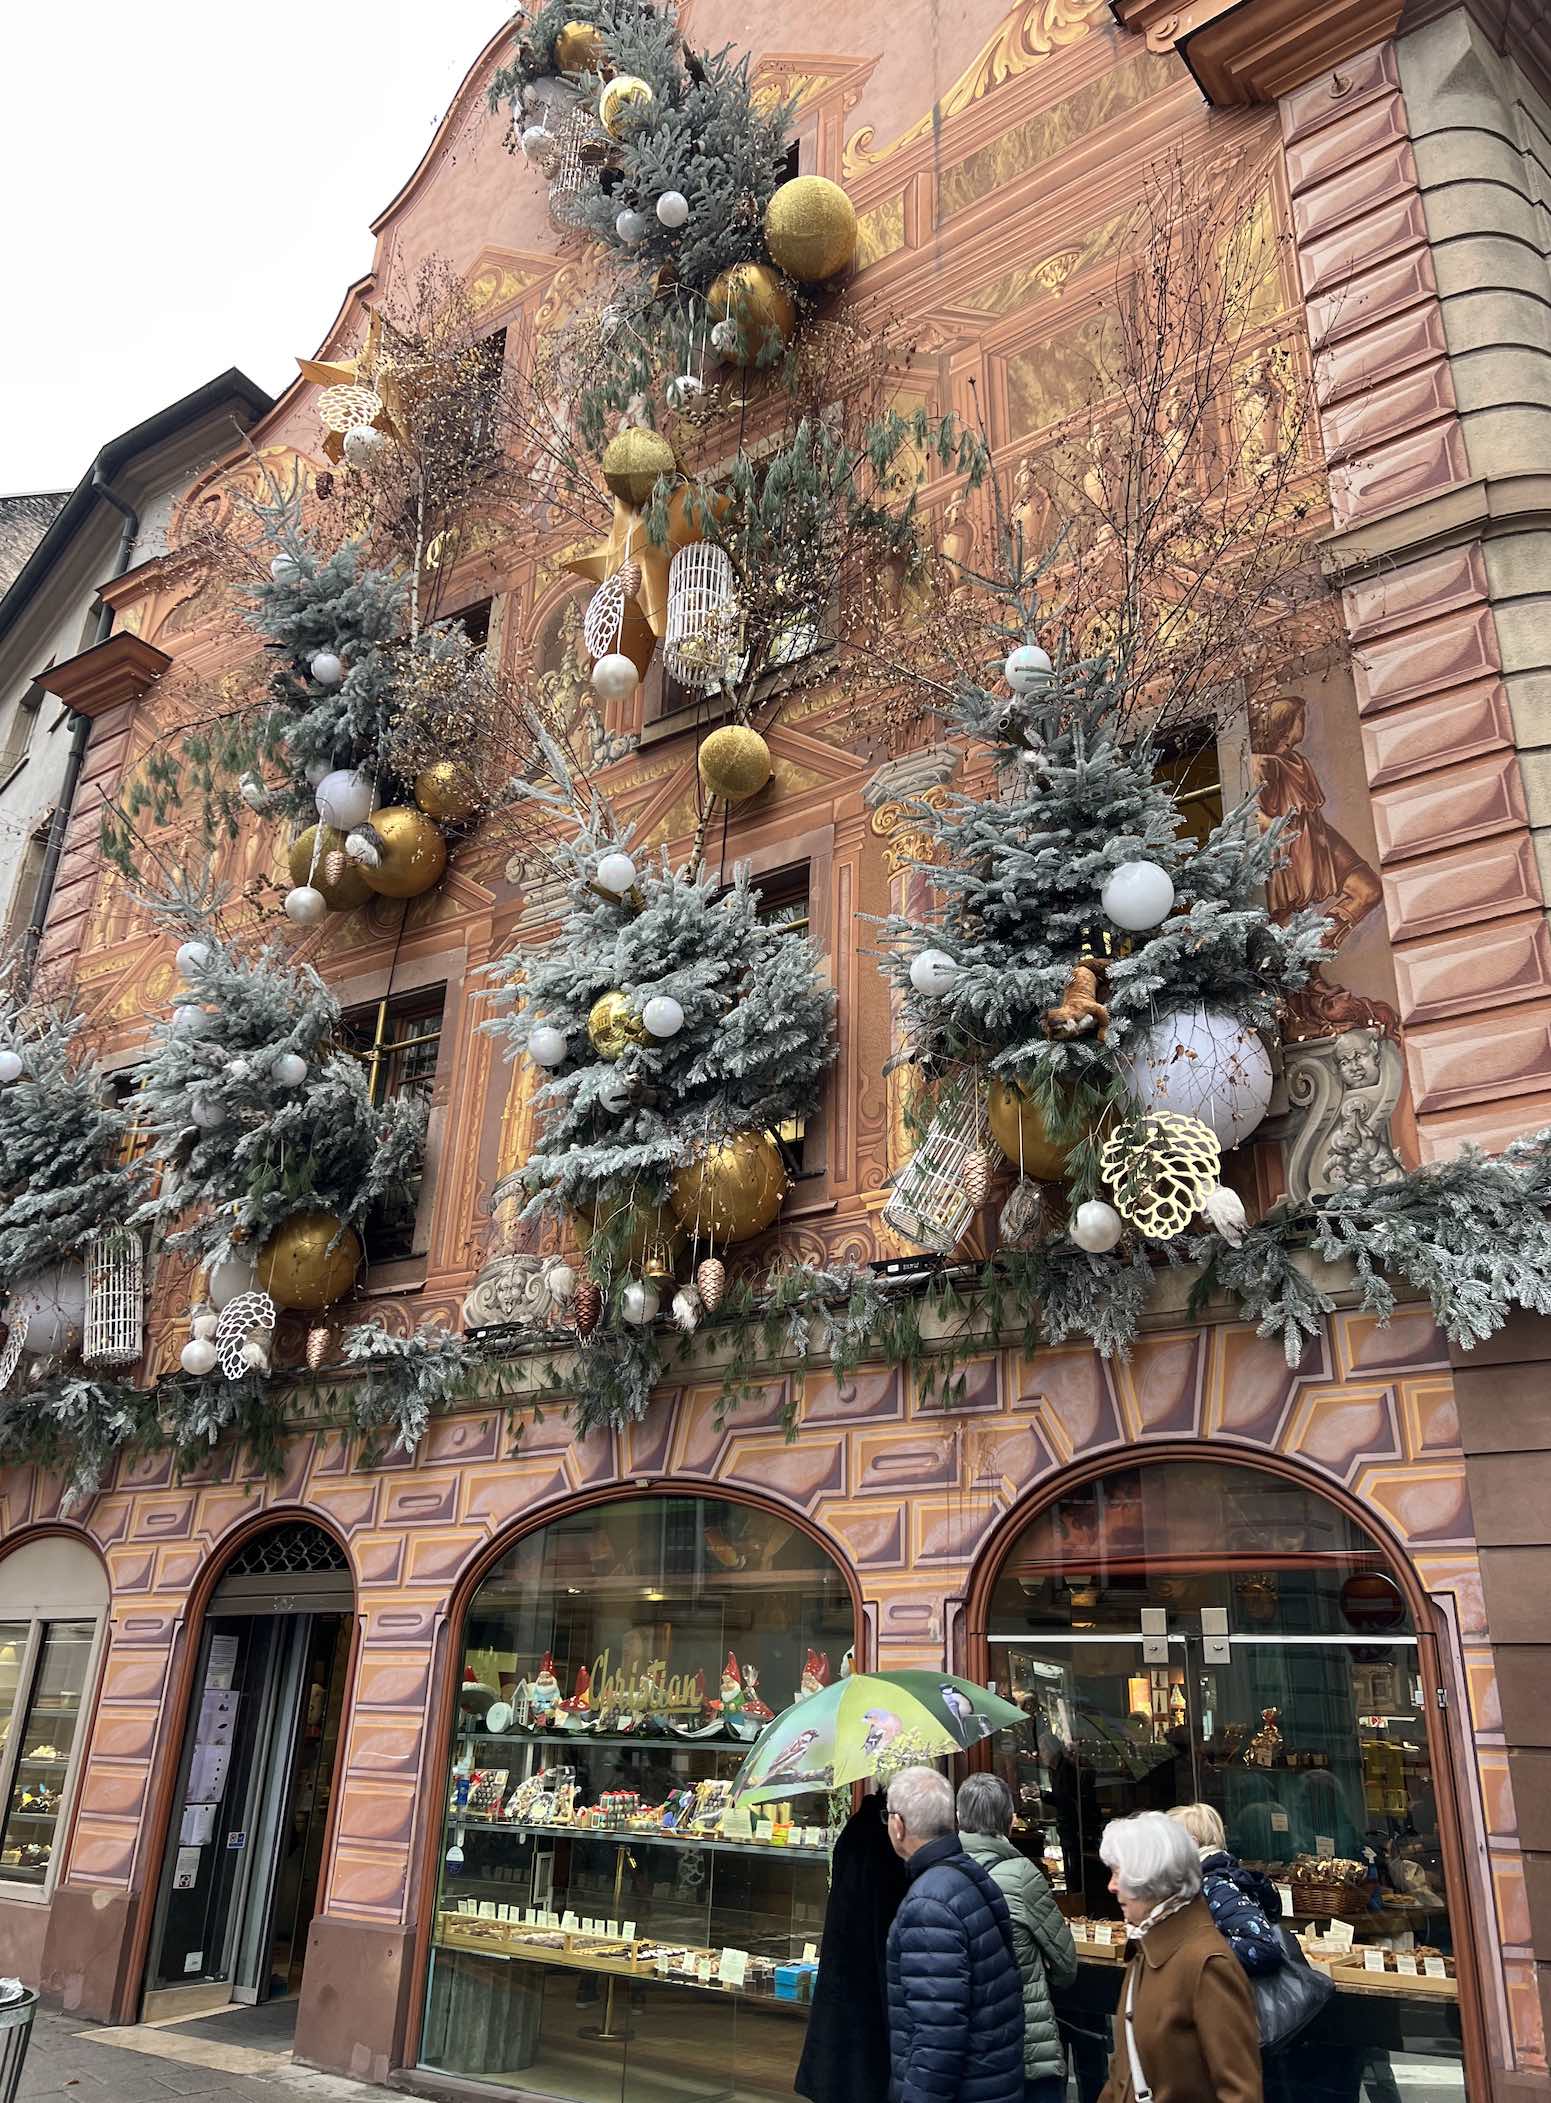 Make sure to also get lost at the Strasbourg Christmas Market. Finding those little hidden streets will show you a more off-the-beathen path!